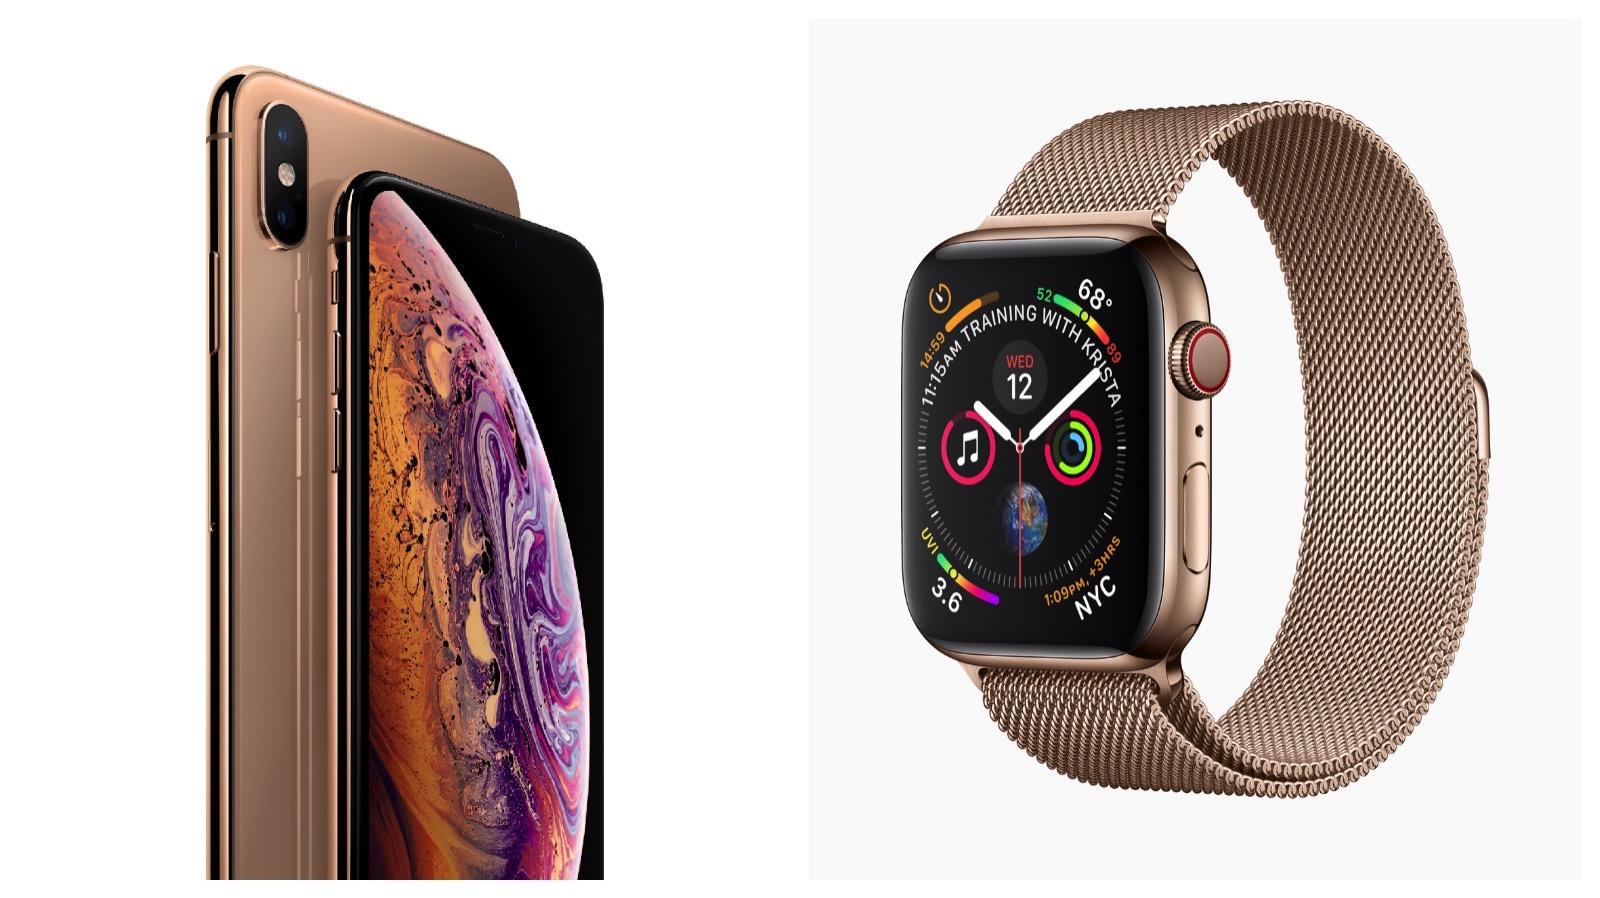 iphone-xs-and-apple-watch-series-4.jpg